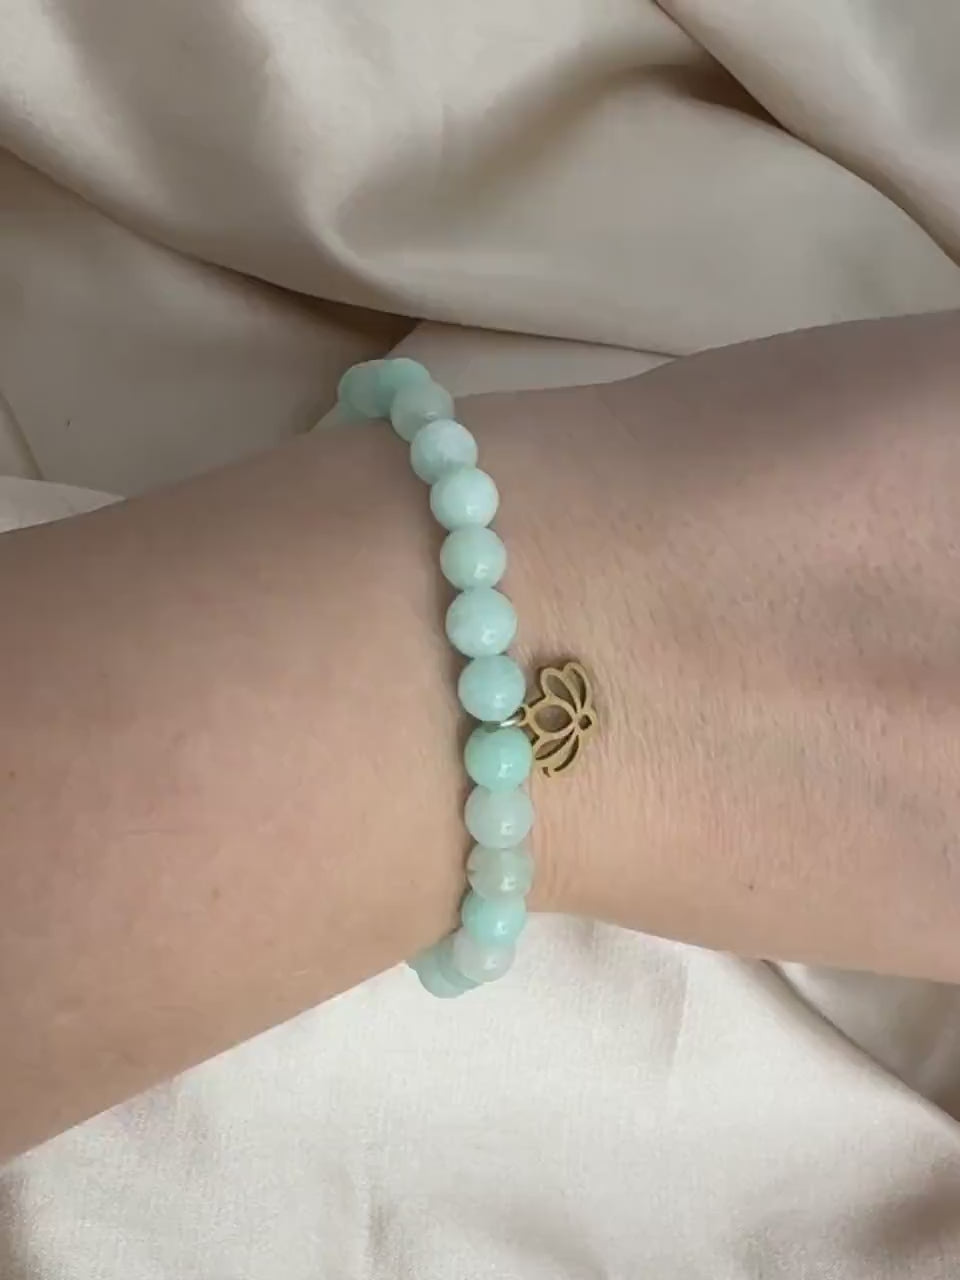 Light Green Jade Bracelet with Lotus Charm, 18K Gold Stainless Steel, Delicate Layer, Simple Everyday, M7-317